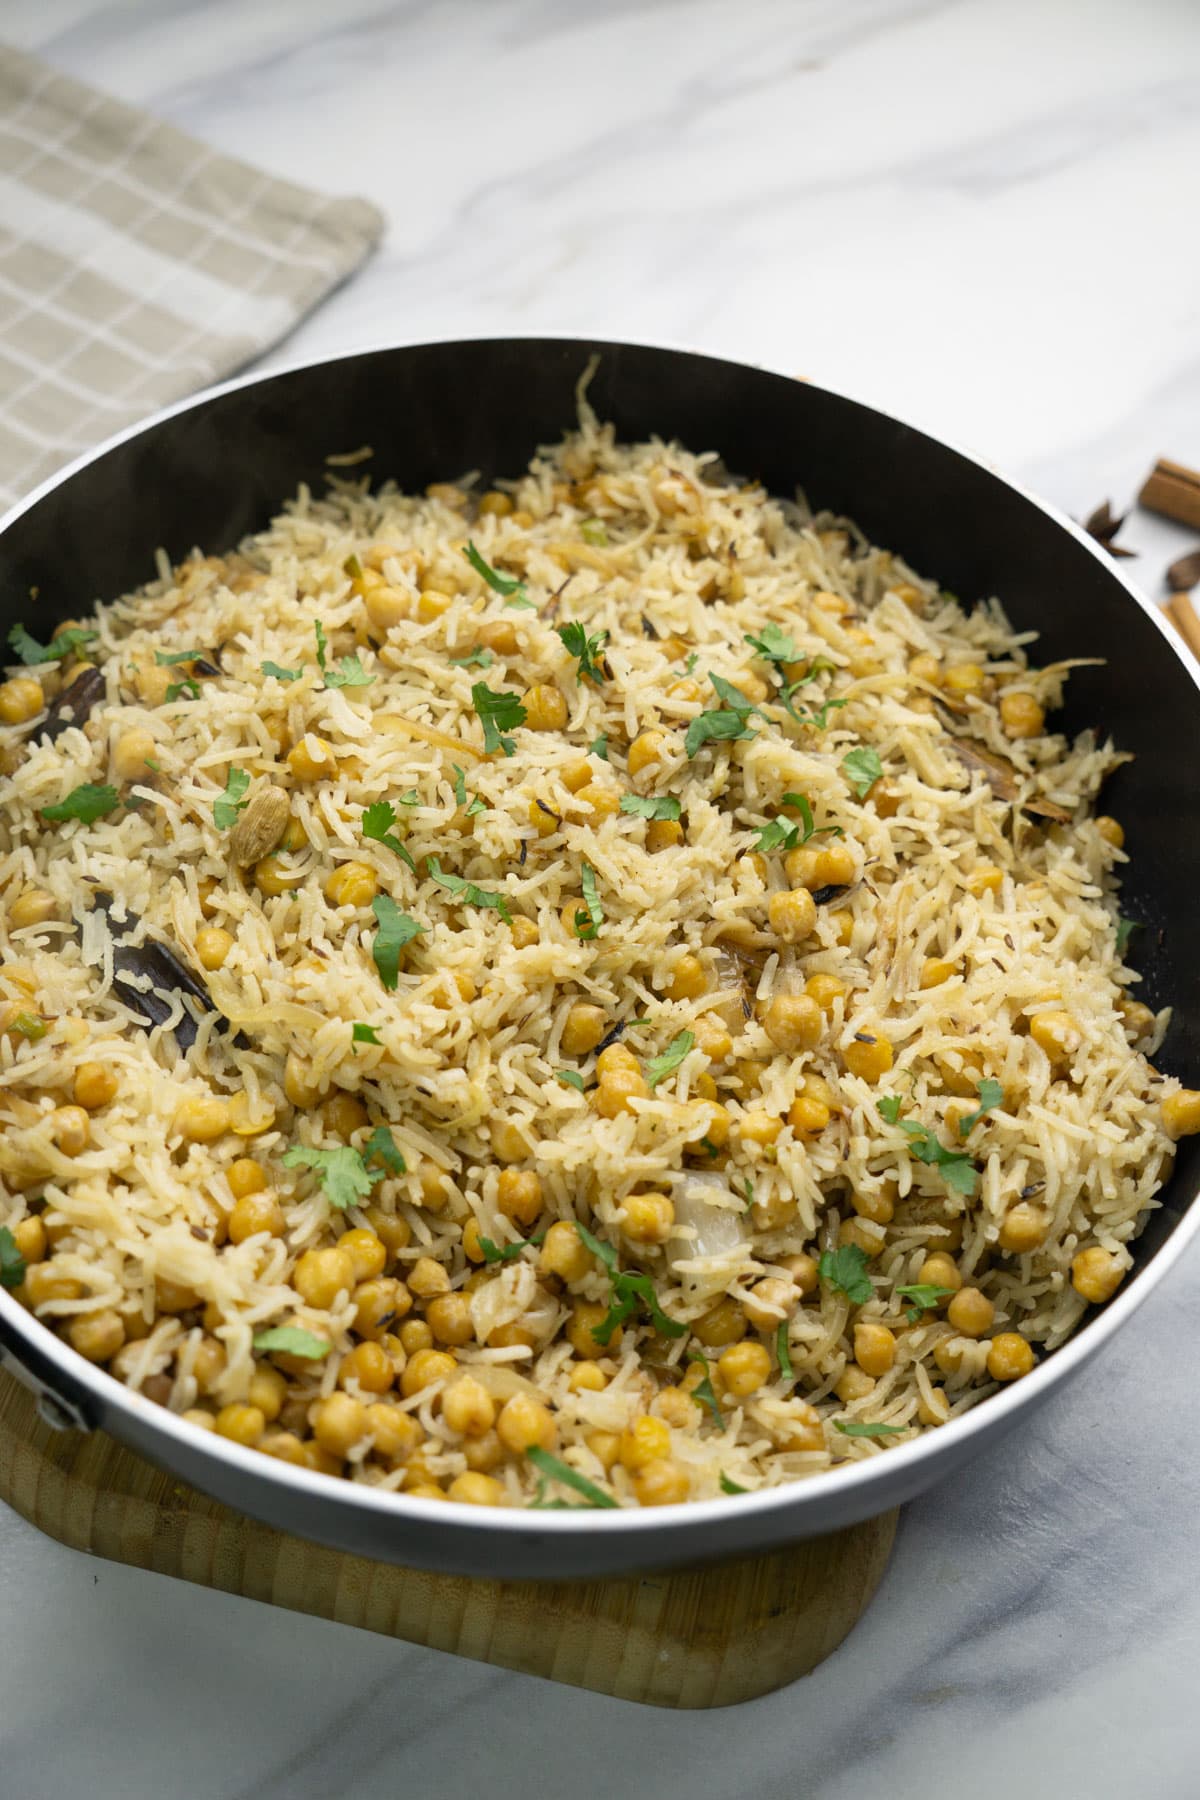 Chana Pulao garnished with cilantro leaves in a frying pan.